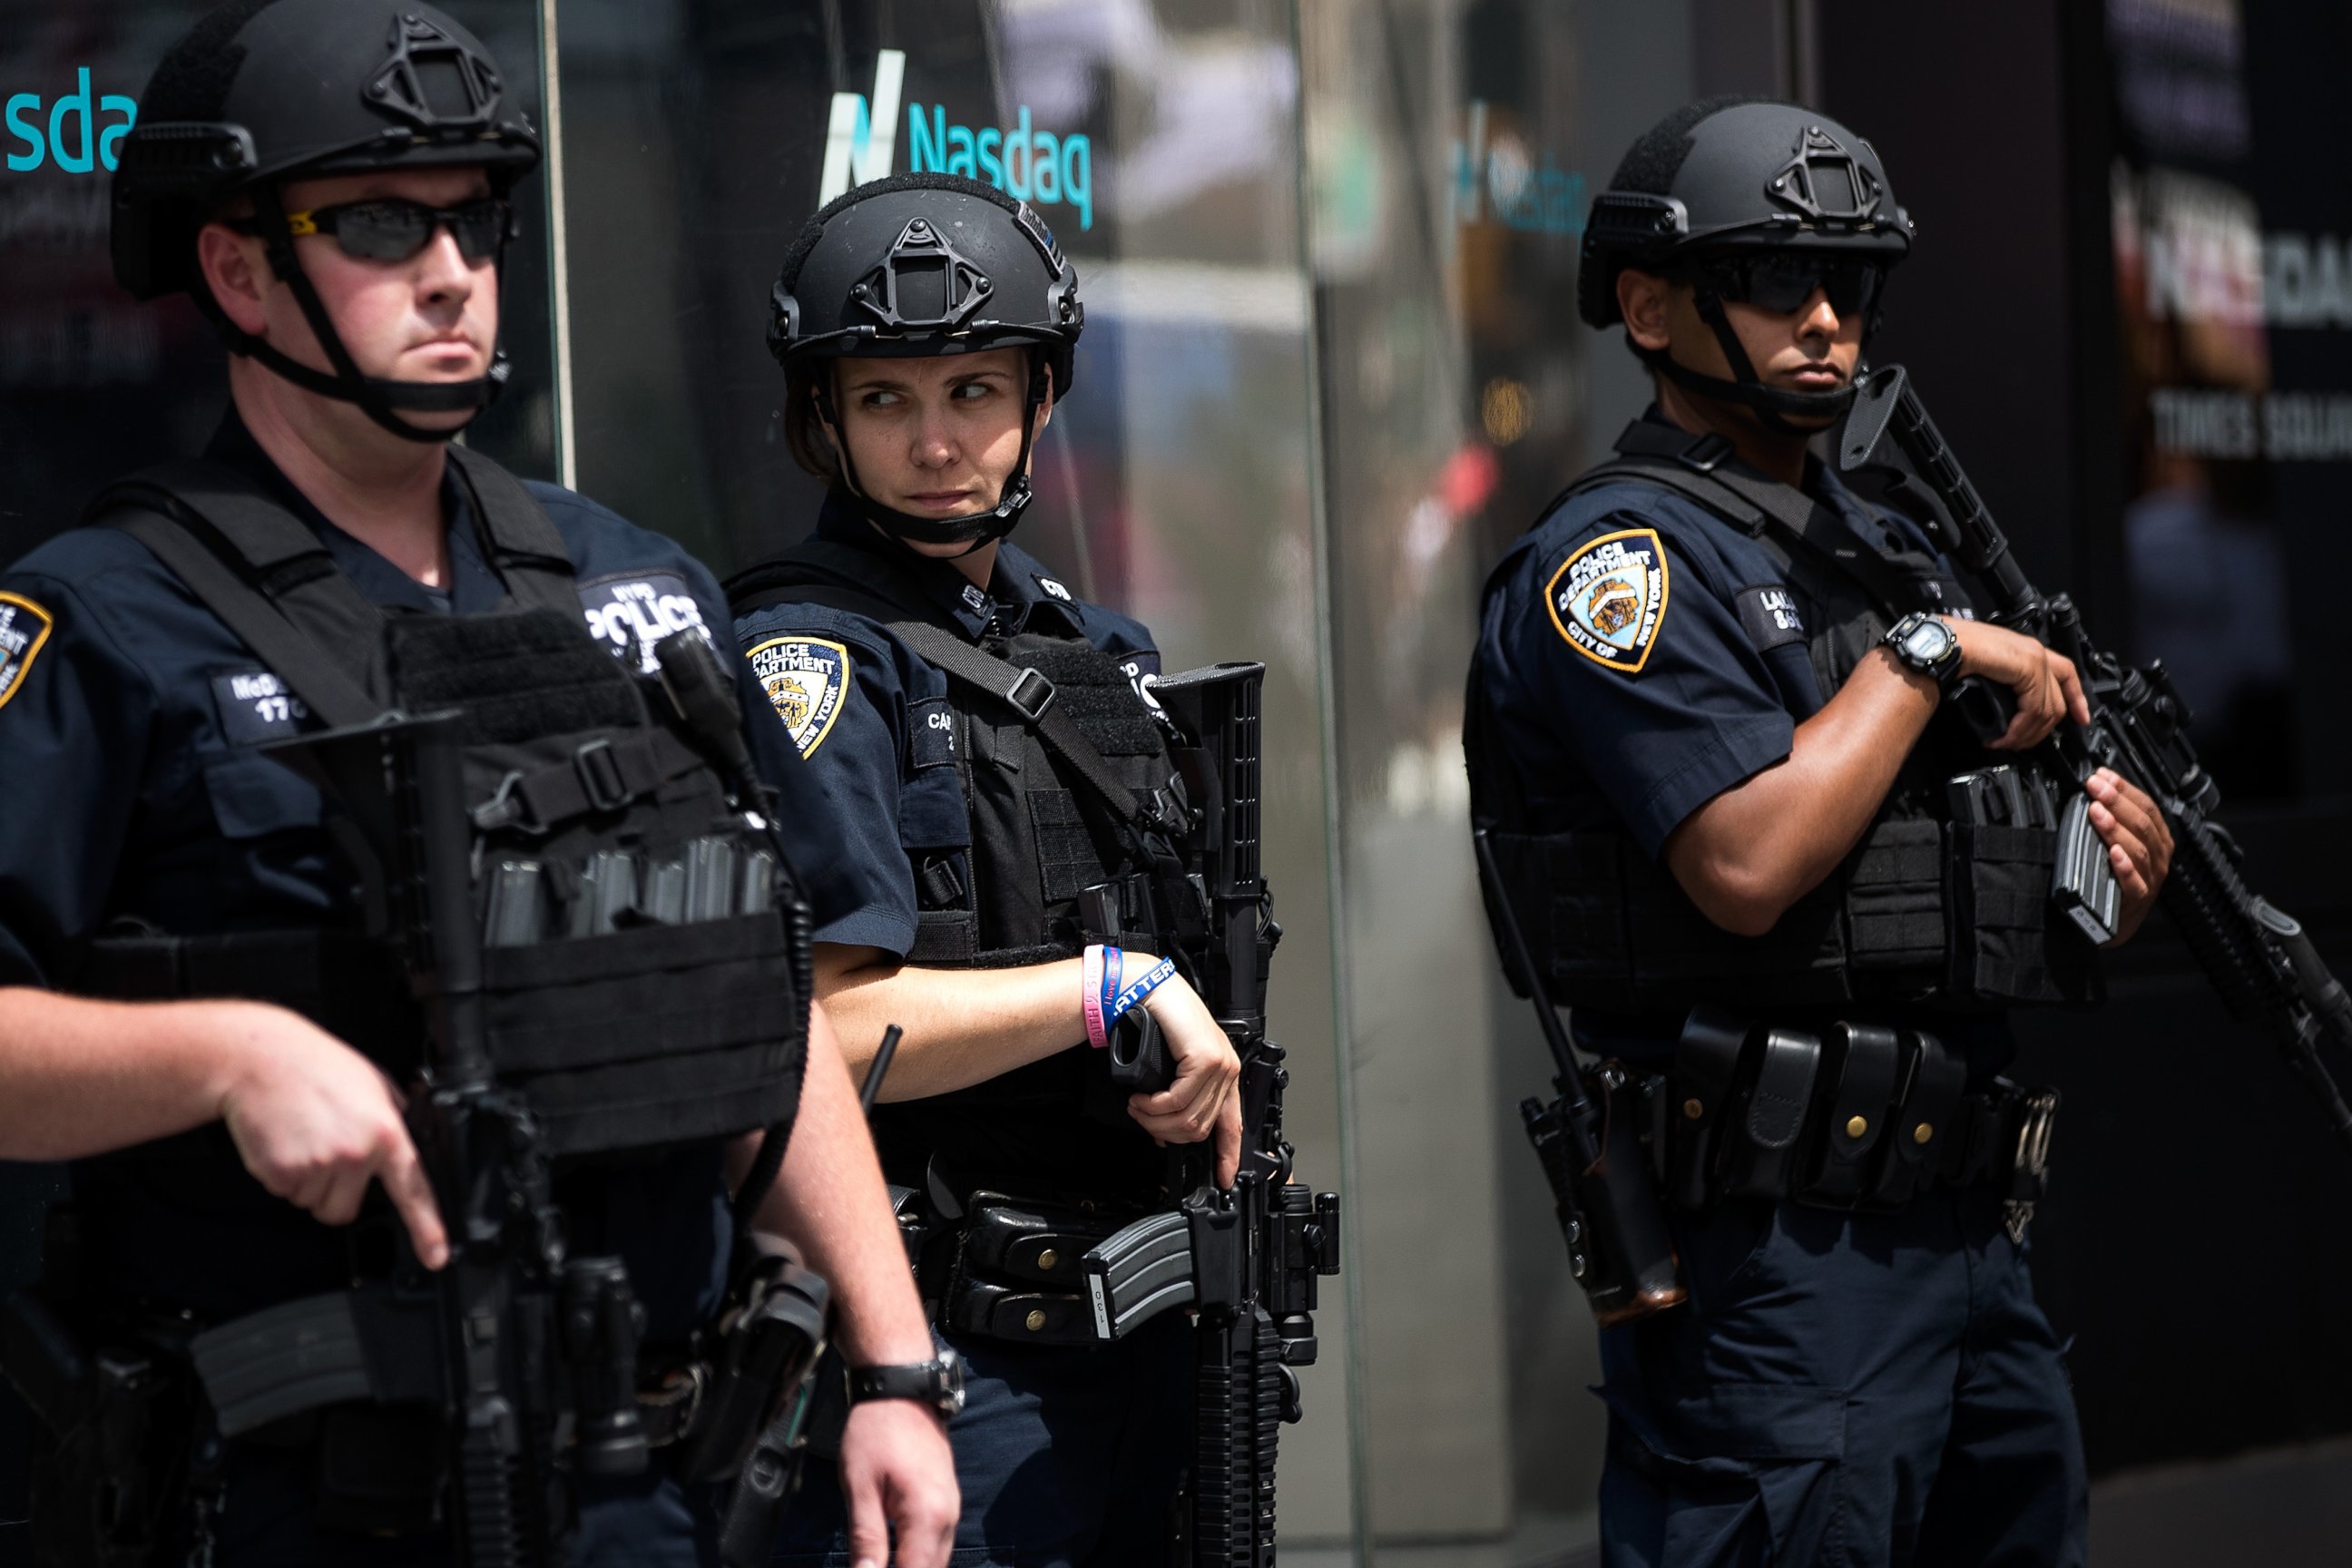 PHOTO: Members of the New York City Police Department stand guard in Times Square, July 15, 2016 in New York City.